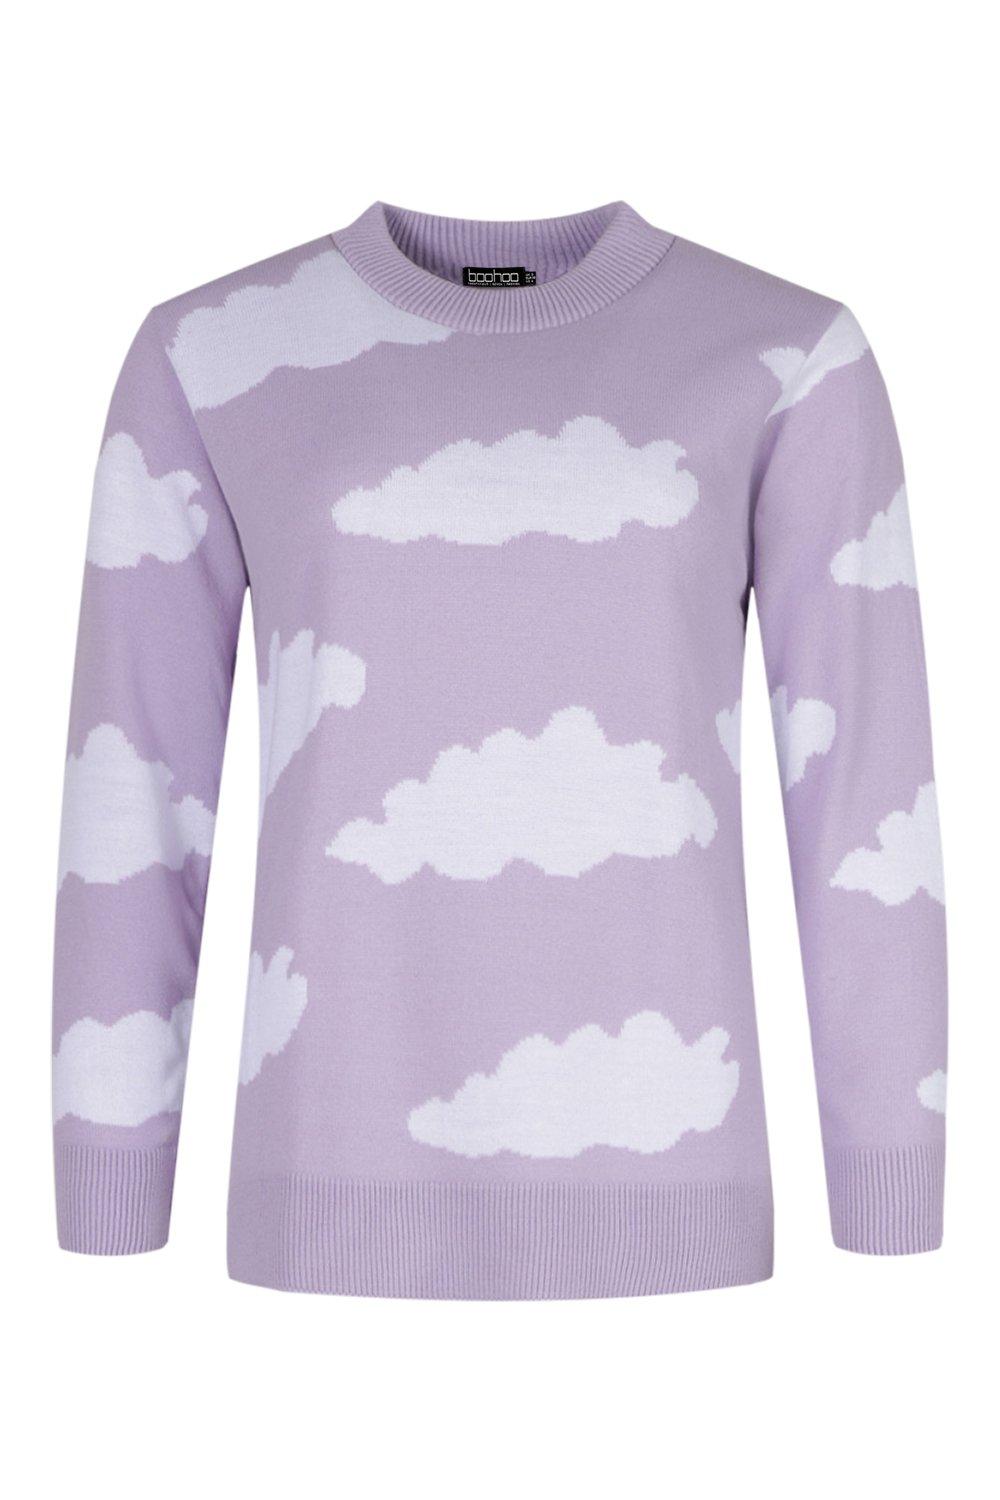 Knitted Cloud Design Sweater